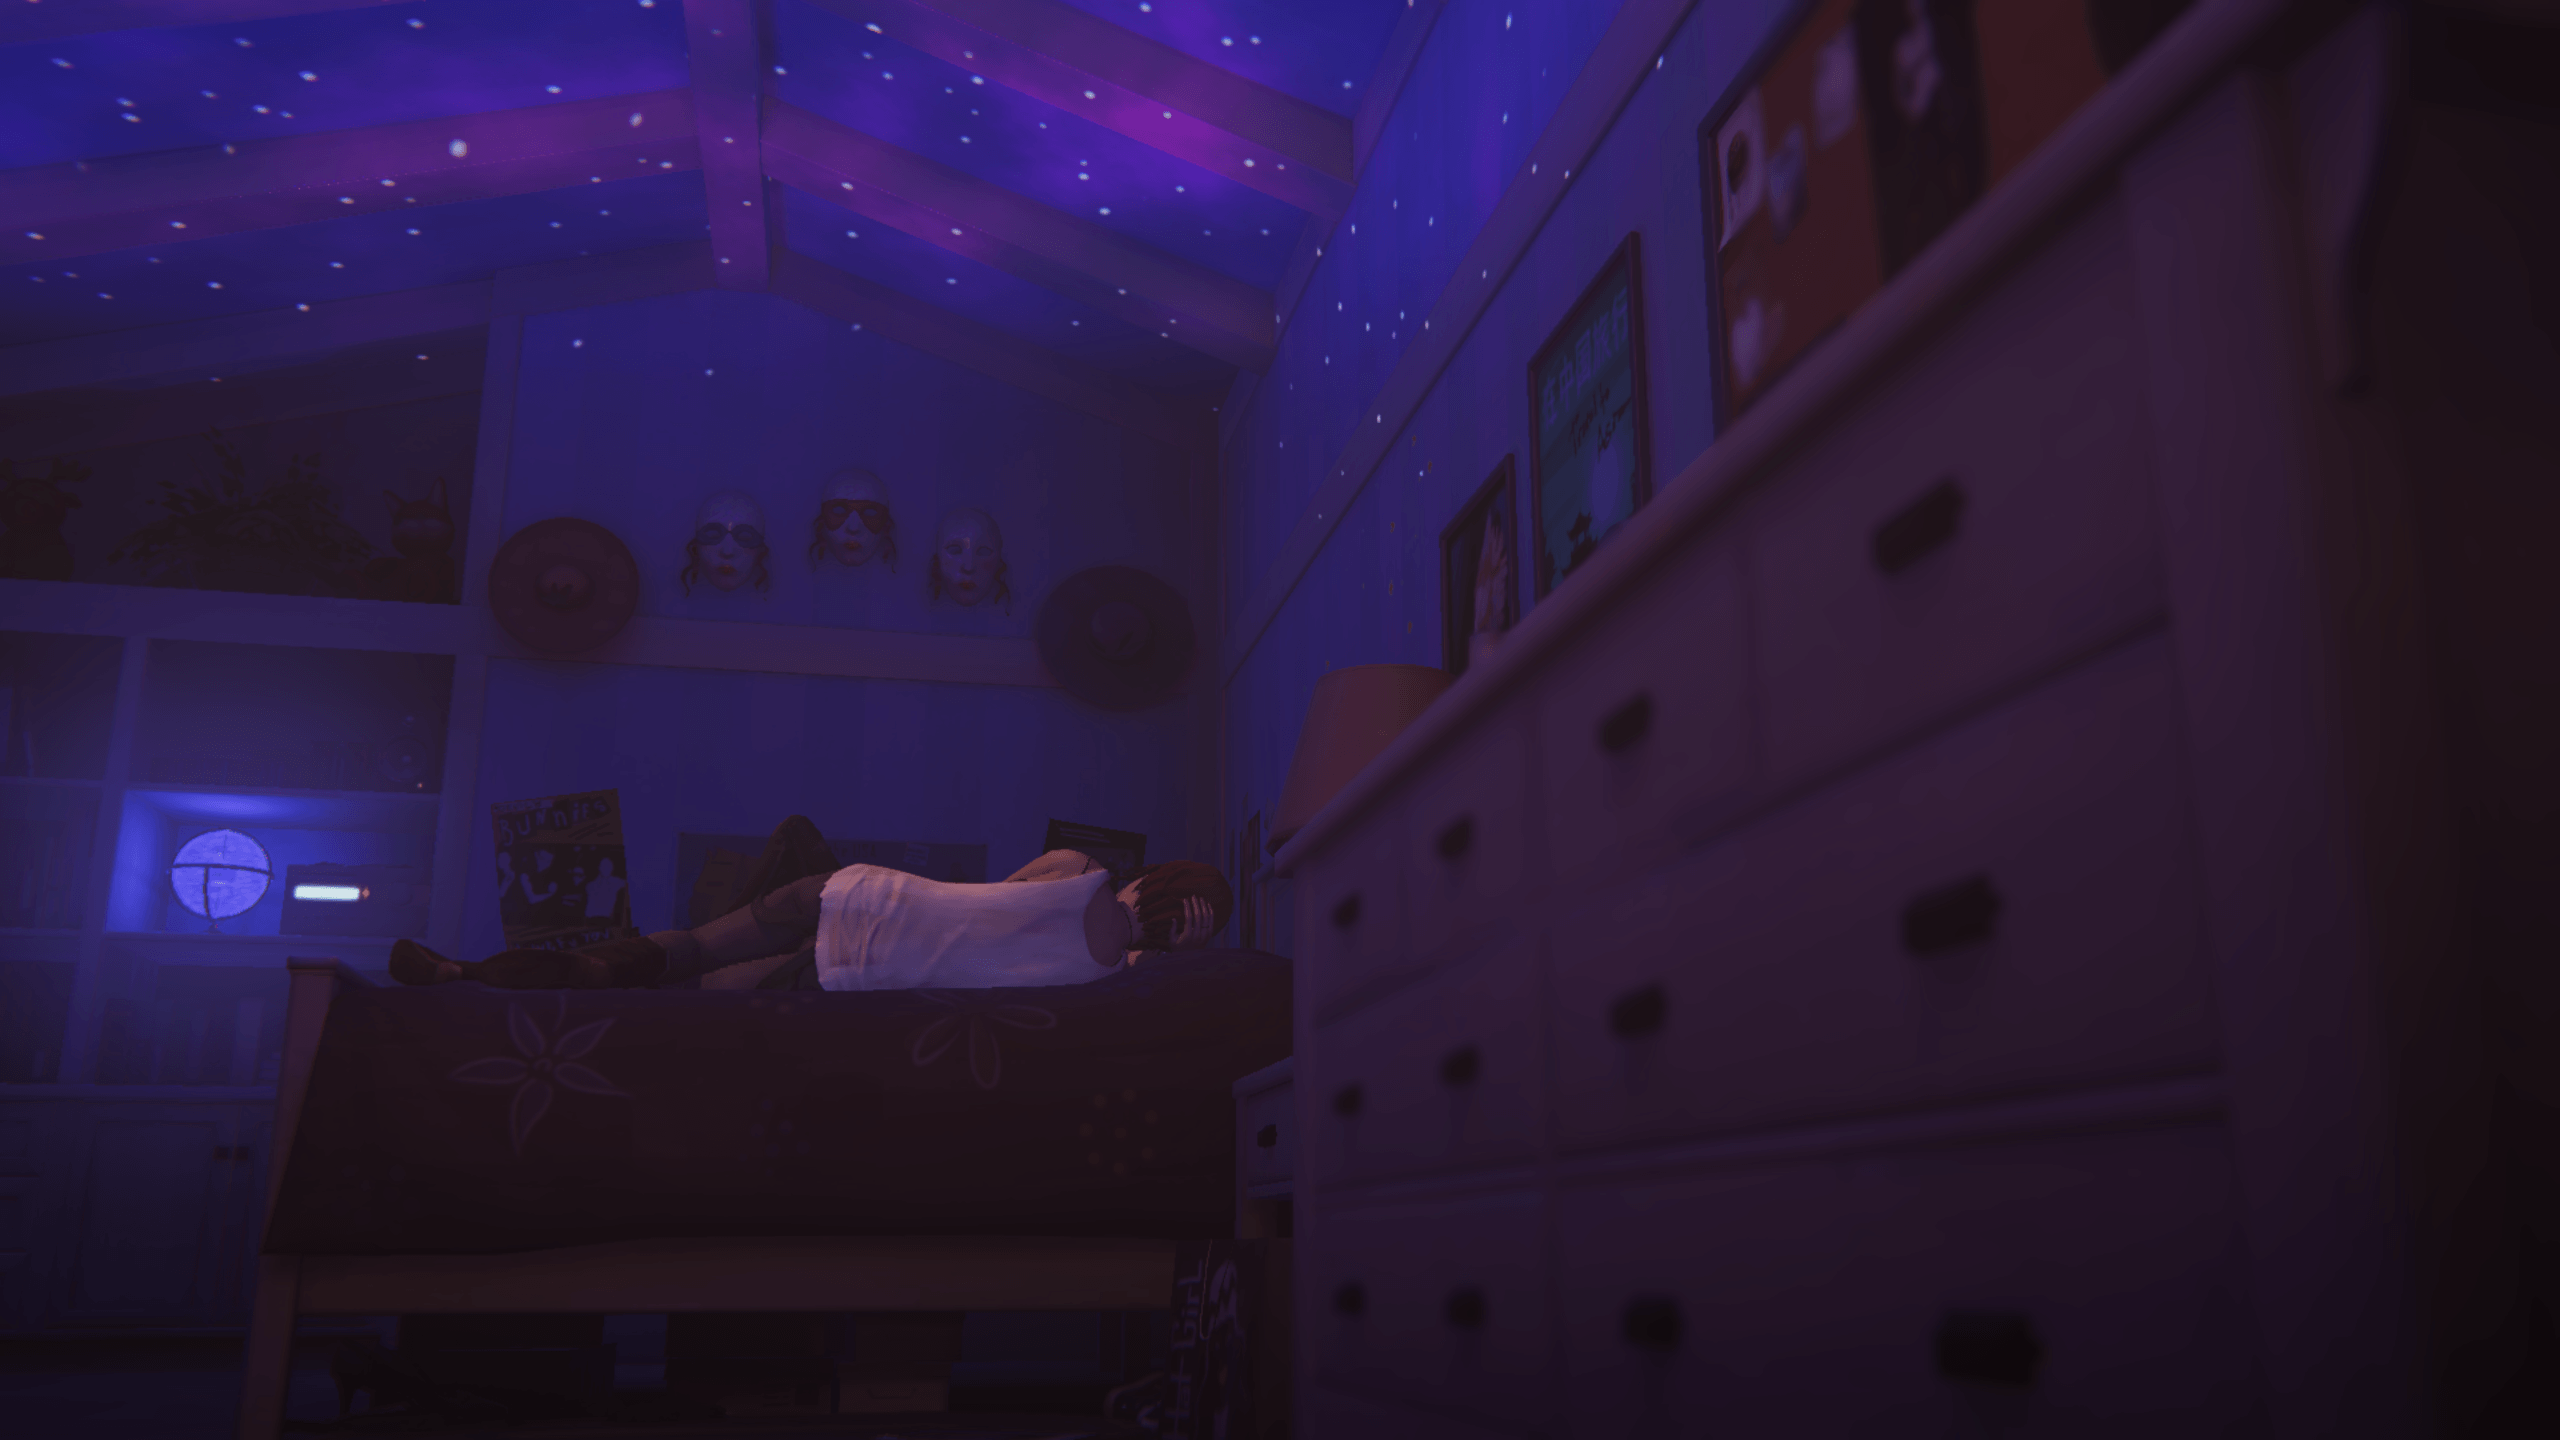 Life is strange: before the storm wallpaper?